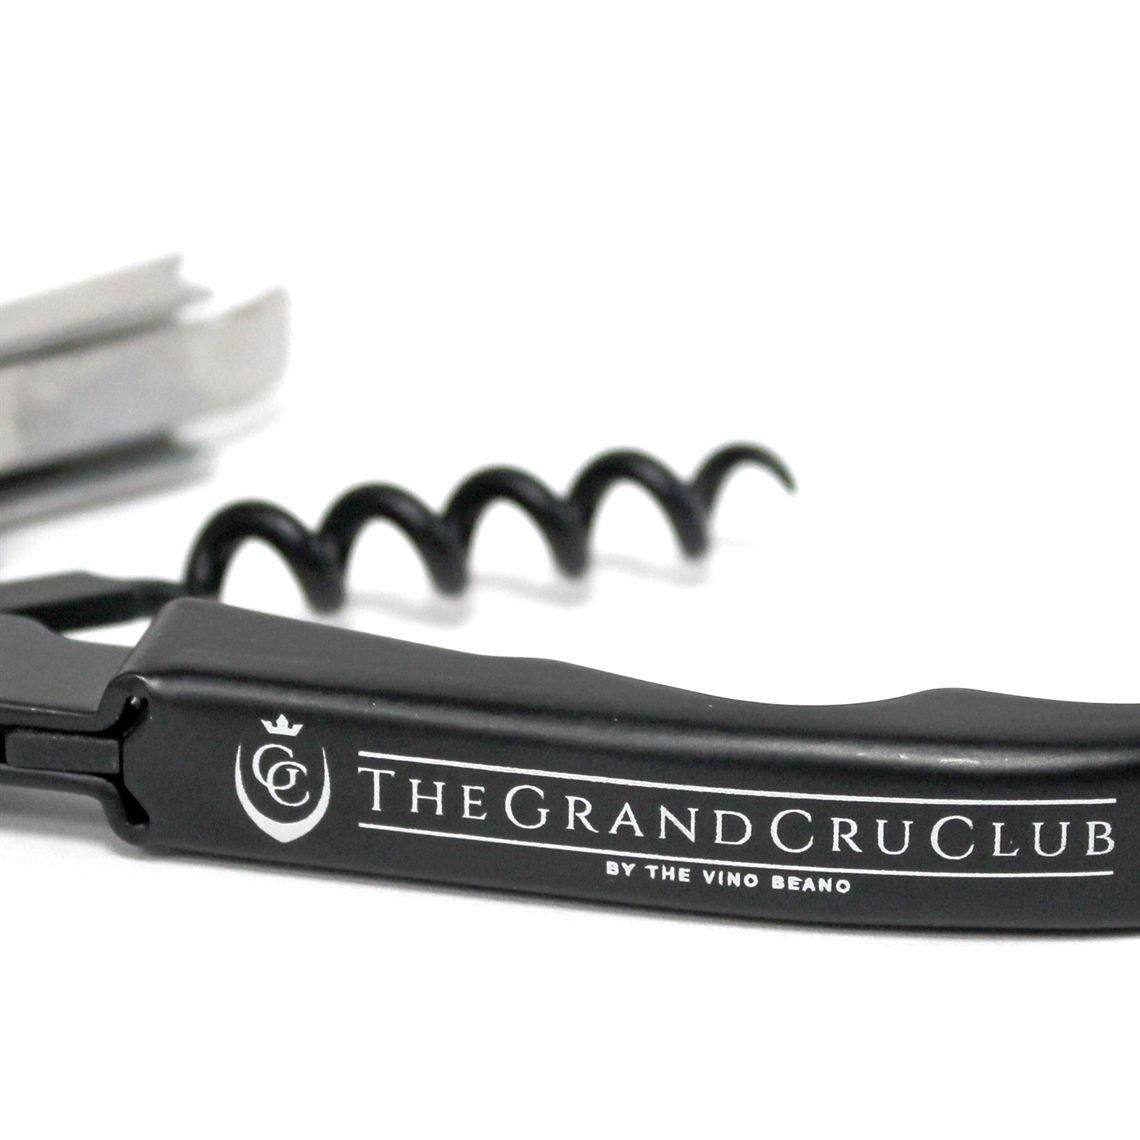 View more cork retriever / butlers thief from our Branded Corkscrews & Bottle Openers range